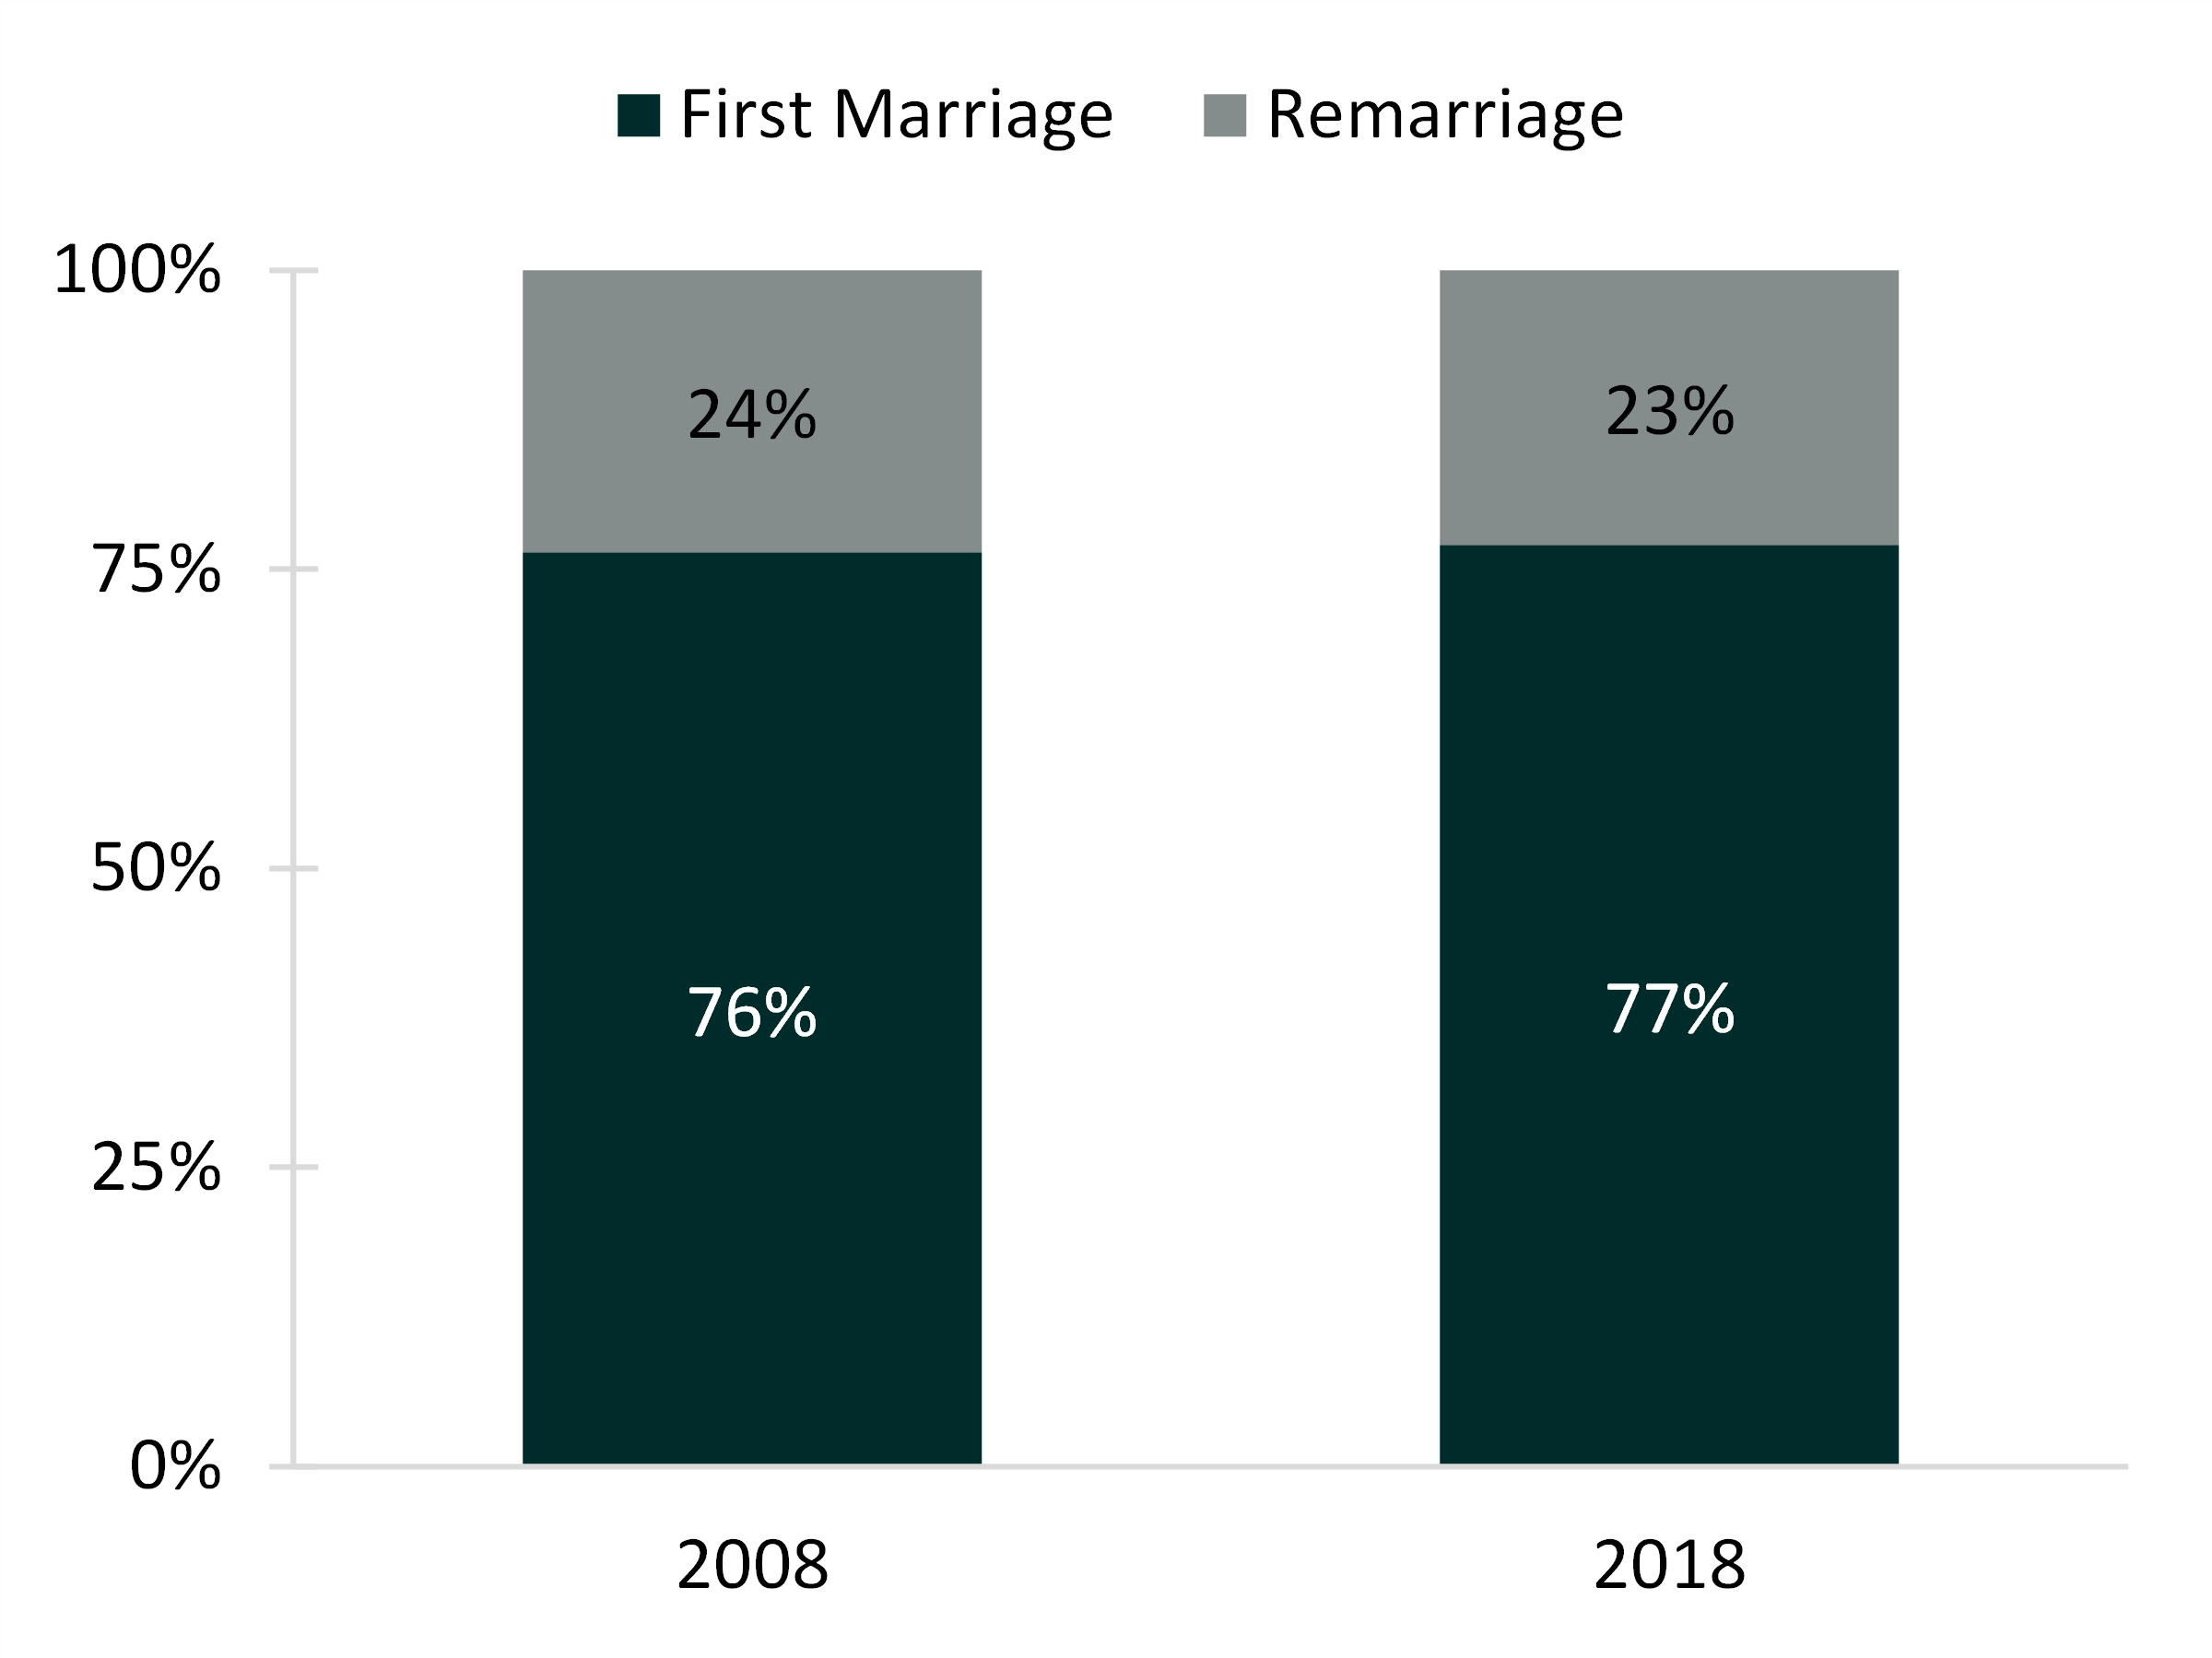 2-color bar chart showing Currently Married Adults in a First Marriage and Remarriage, 2008 & 2018